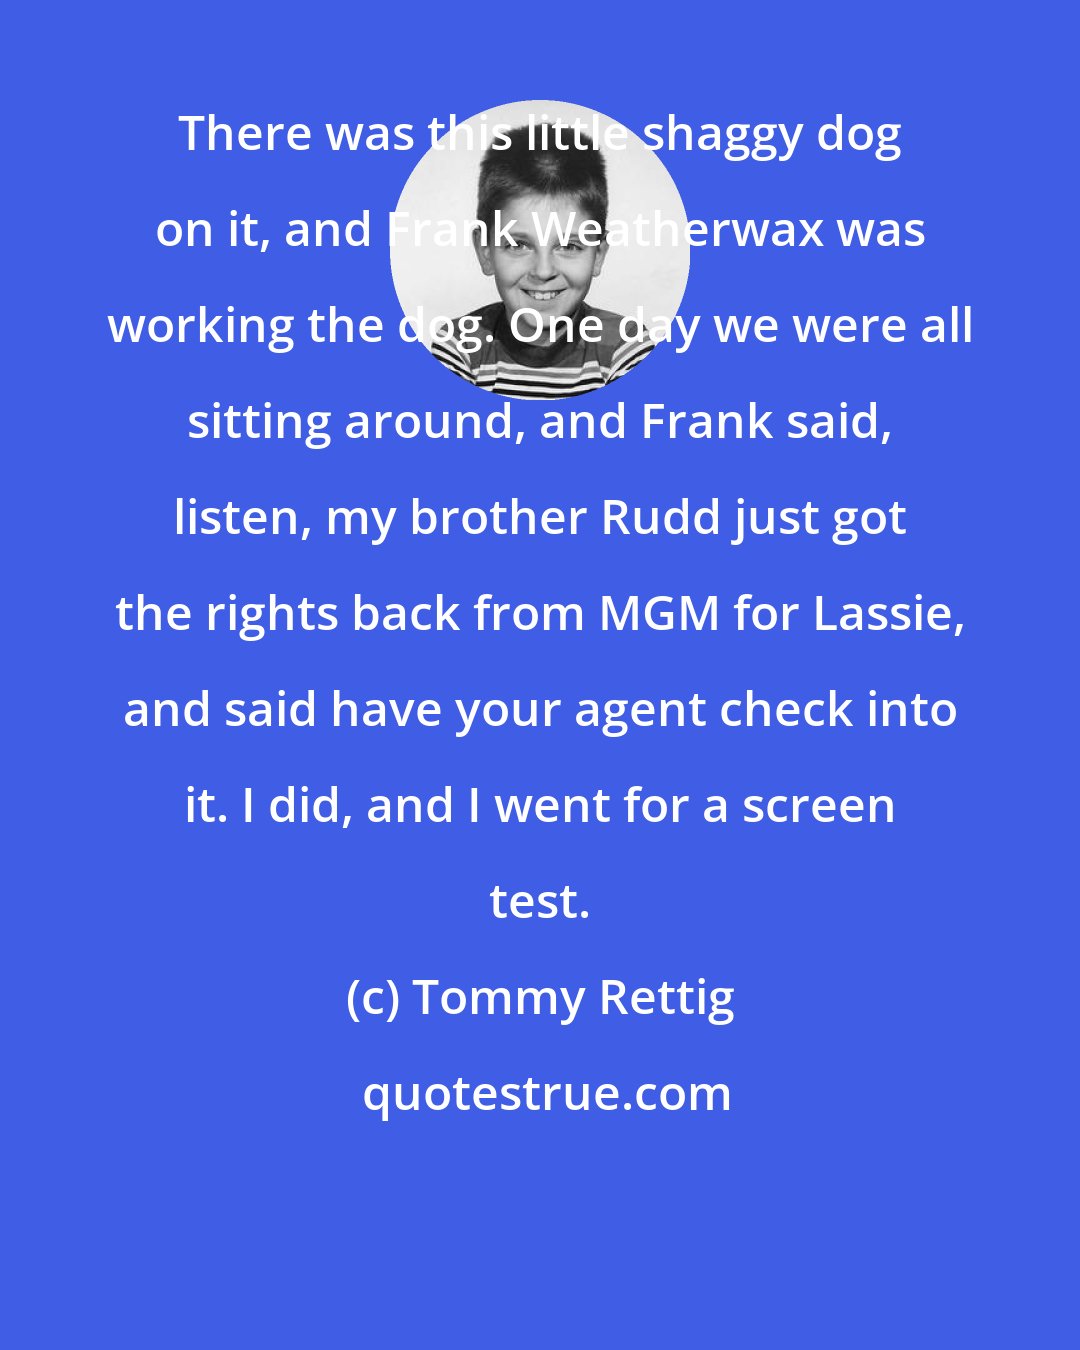 Tommy Rettig: There was this little shaggy dog on it, and Frank Weatherwax was working the dog. One day we were all sitting around, and Frank said, listen, my brother Rudd just got the rights back from MGM for Lassie, and said have your agent check into it. I did, and I went for a screen test.